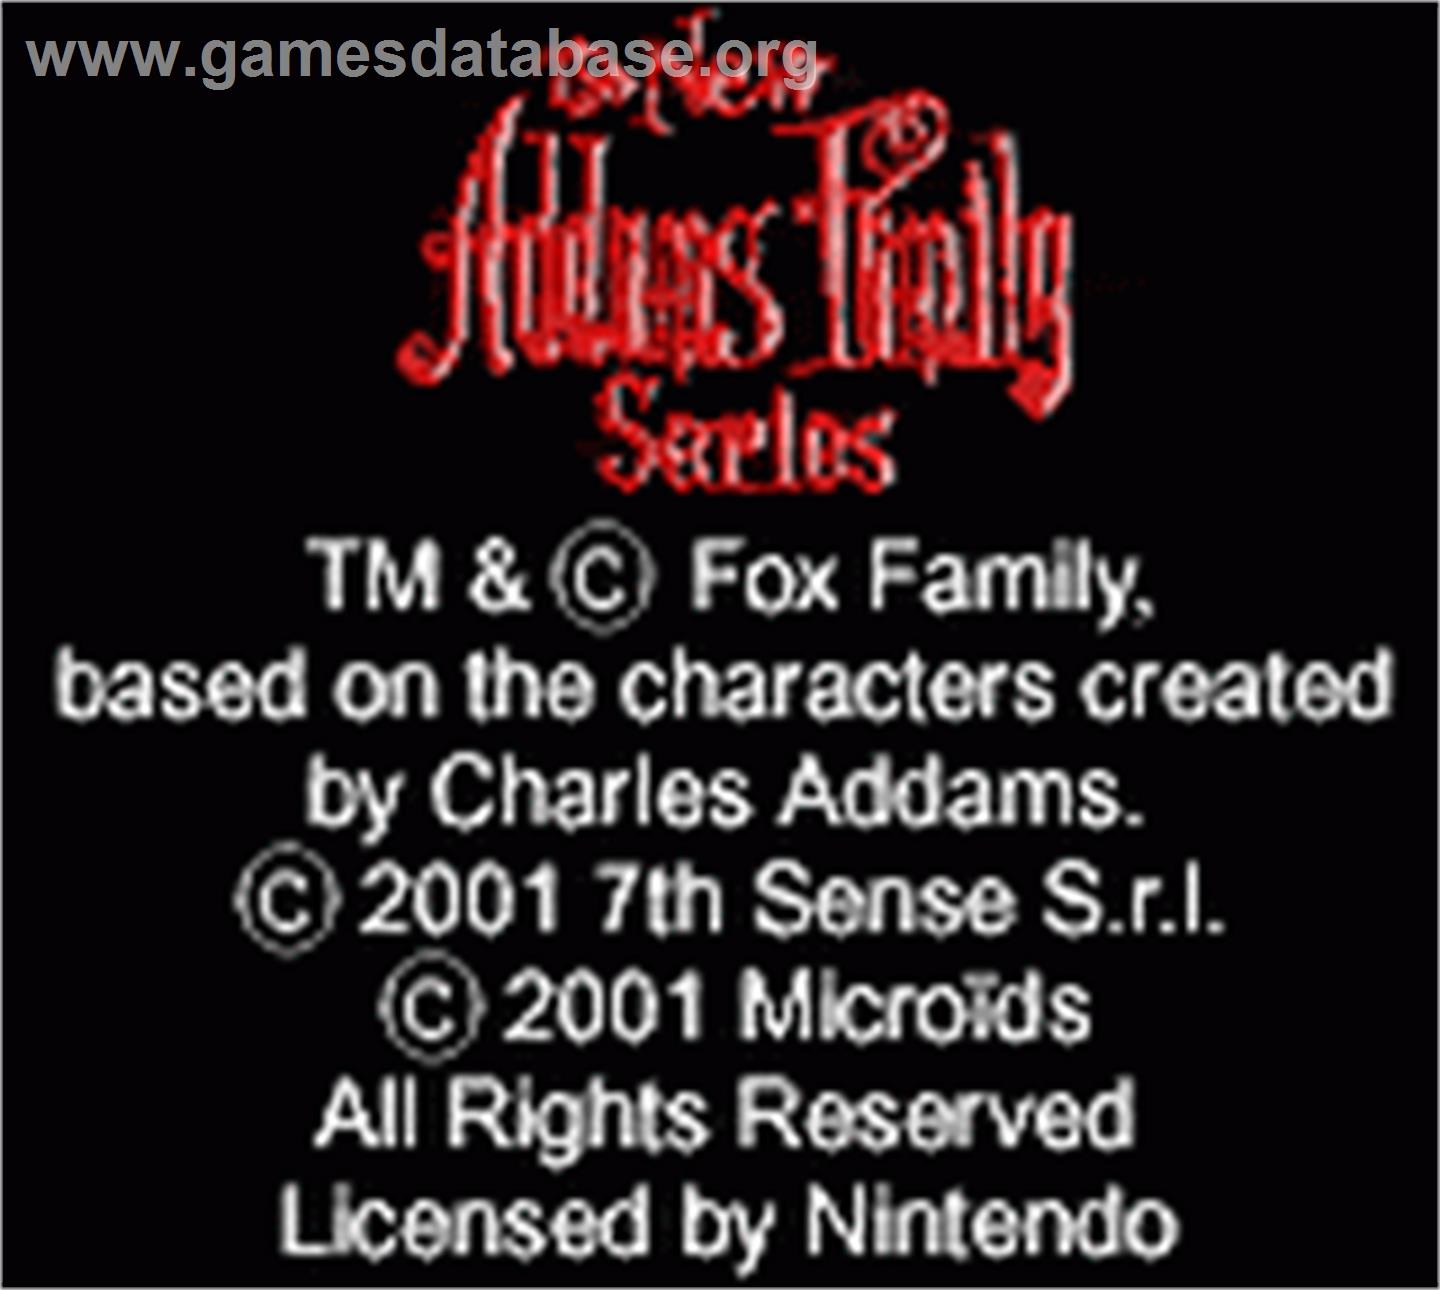 New Addams Family Series - Nintendo Game Boy Color - Artwork - Title Screen